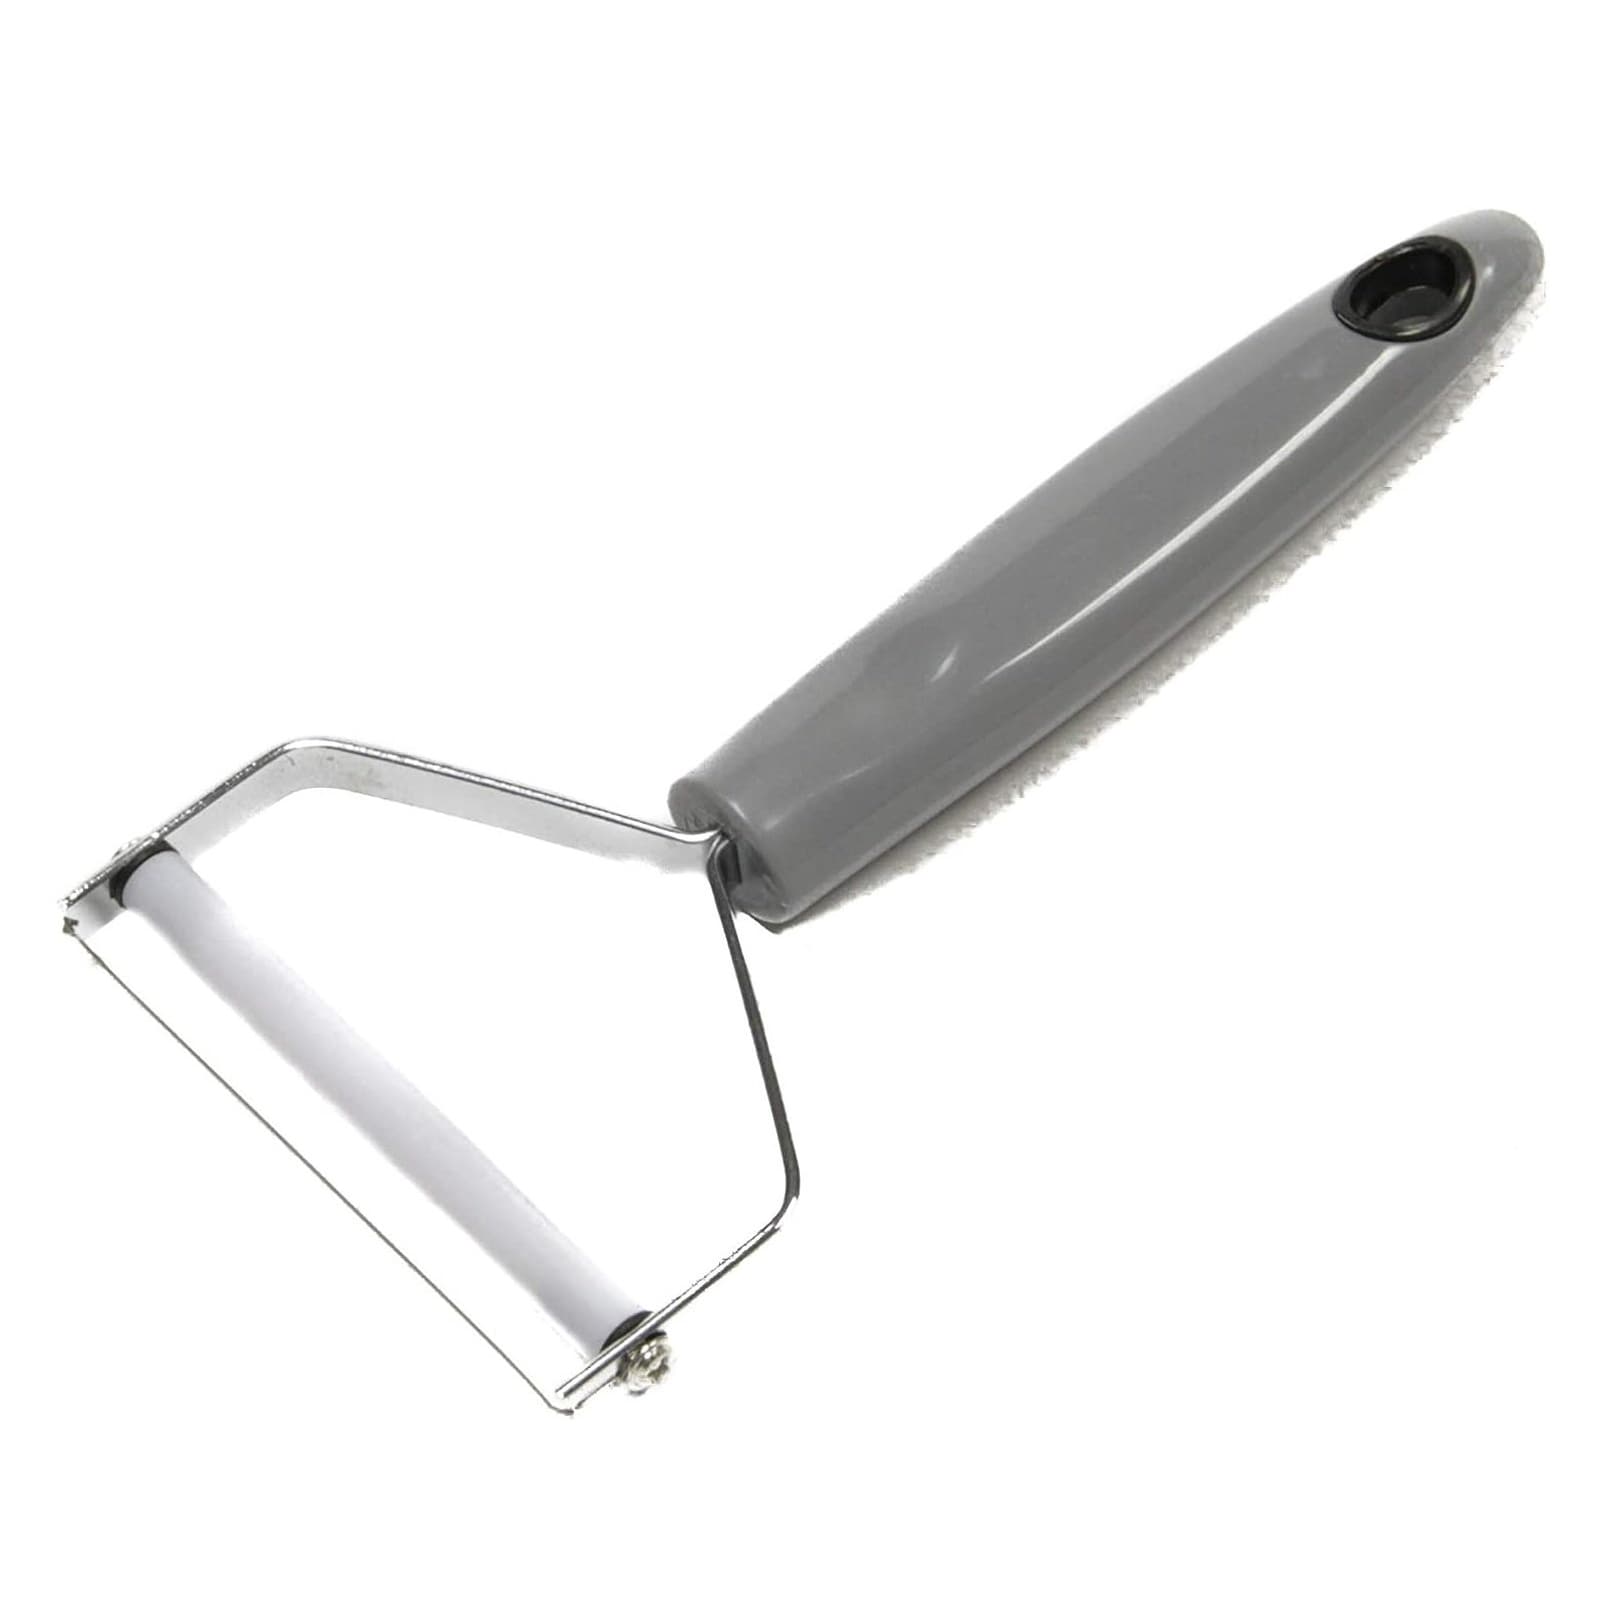 https://ak1.ostkcdn.com/images/products/is/images/direct/f5d2192f03ba222dc6f091c738a7d0c5dd3a3518/Chef-Craft-Stainless-Steel-Blade-Cheese-Slicer.jpg